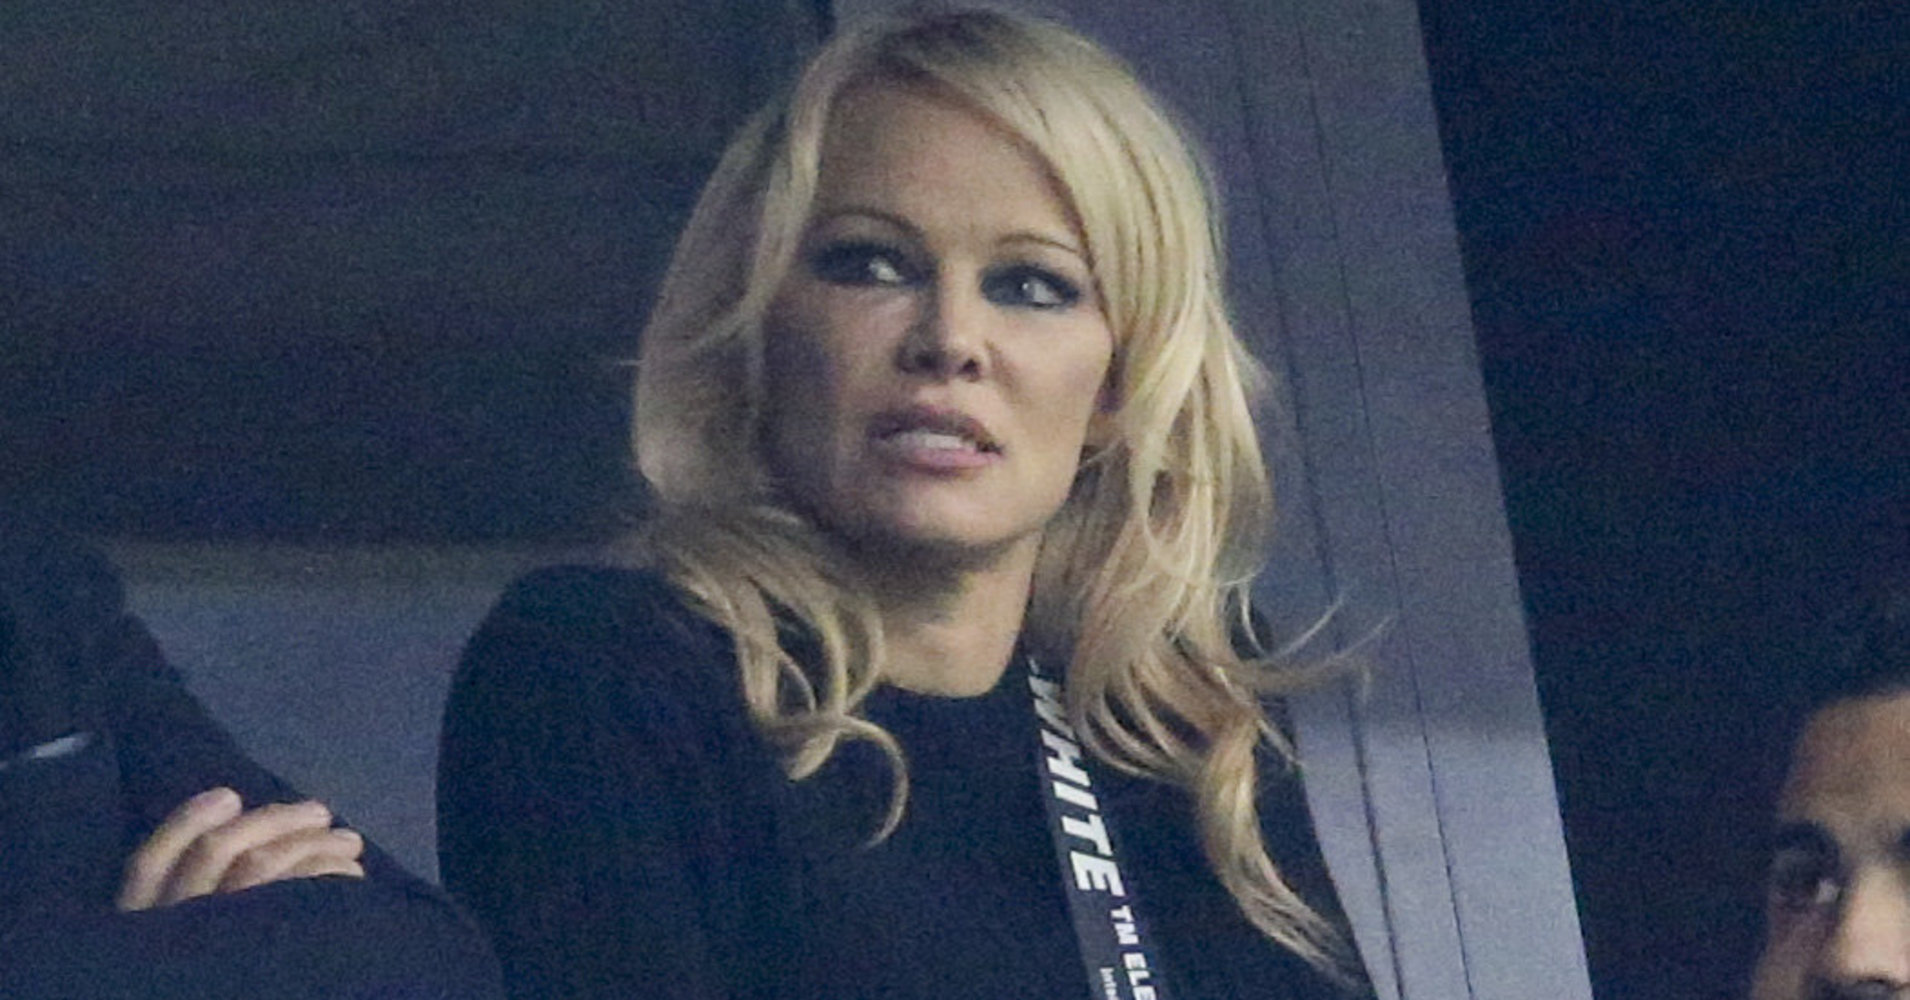  Pam Anderson Tweets About Paris Riots, And The World Takes Notice